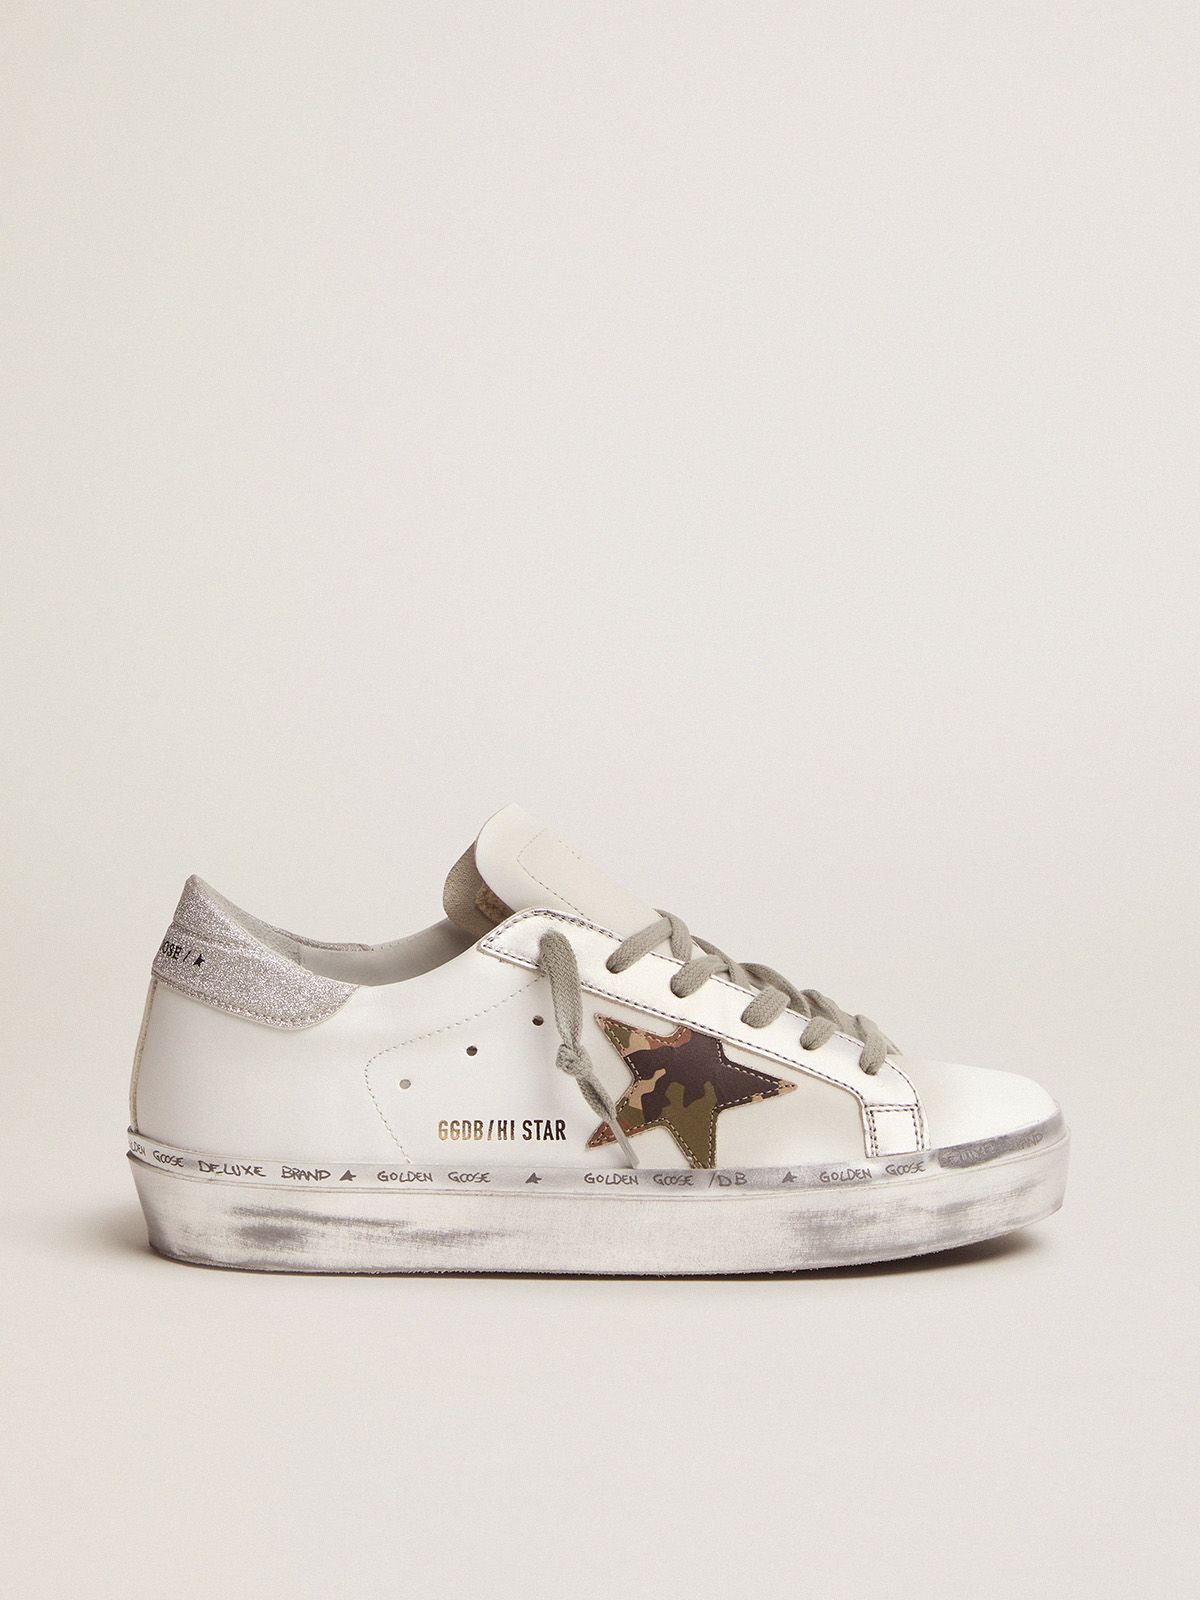 golden goose camouflage Hi star heel and sneakers glittery Star tab with